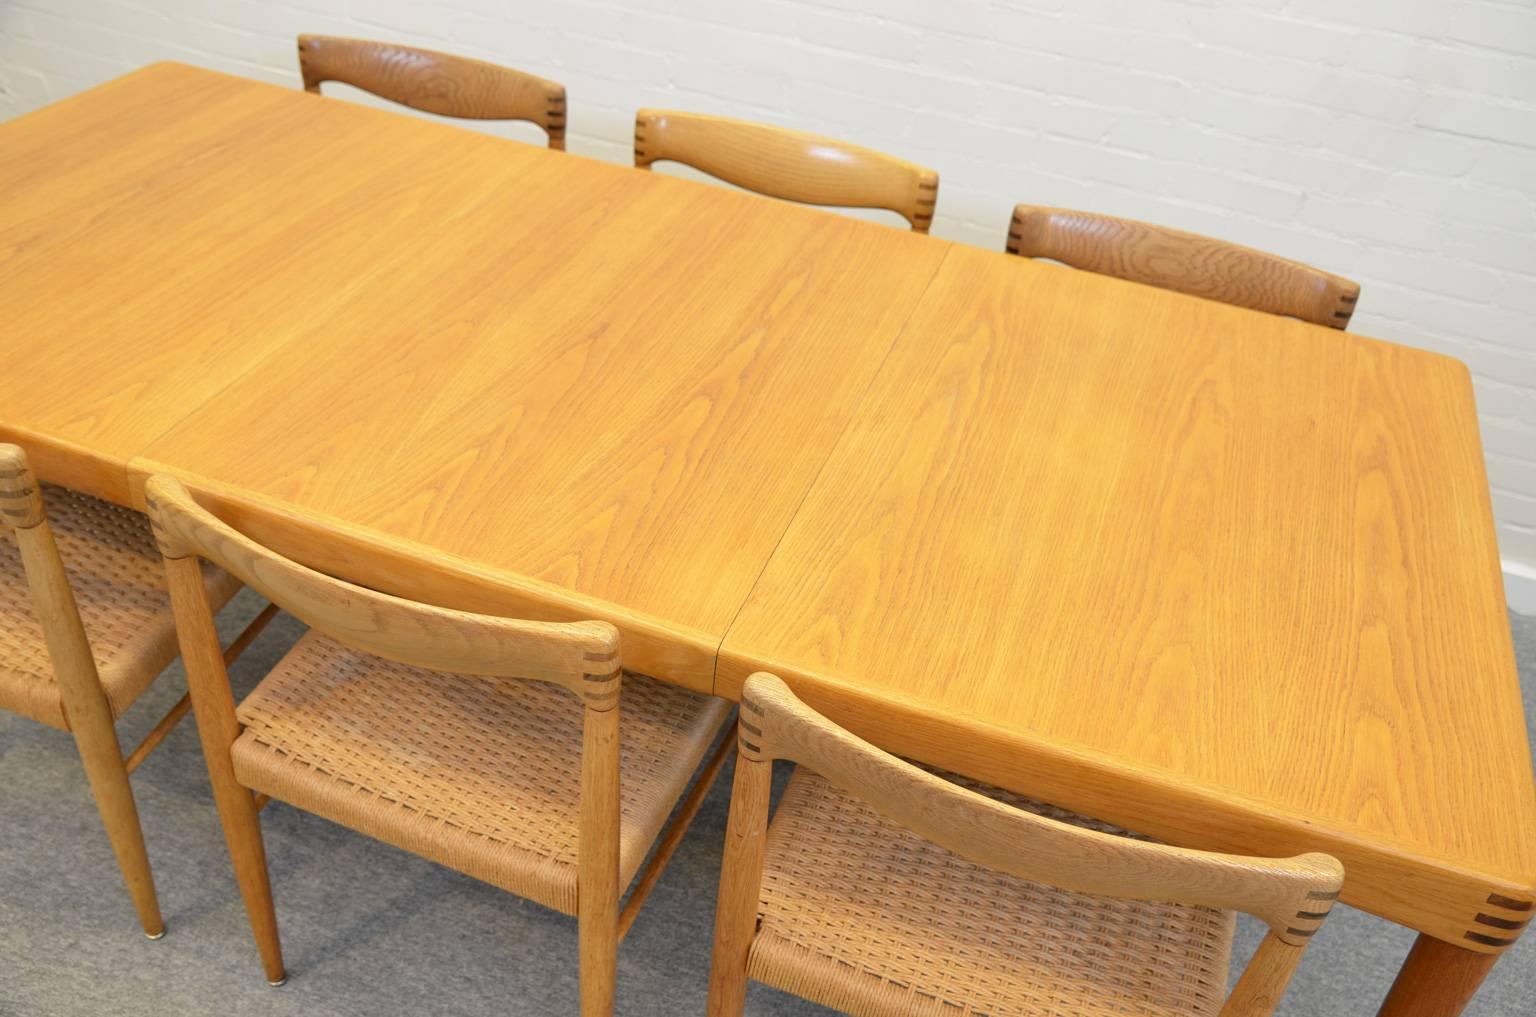 Simple but very elegant design which draws the attention to the very nice details at each end of the backrests and on the table legs. The table is marked 'Bramin made in Denmark' en dated 25 September 1968.
Measurements table: Height 72, width 135